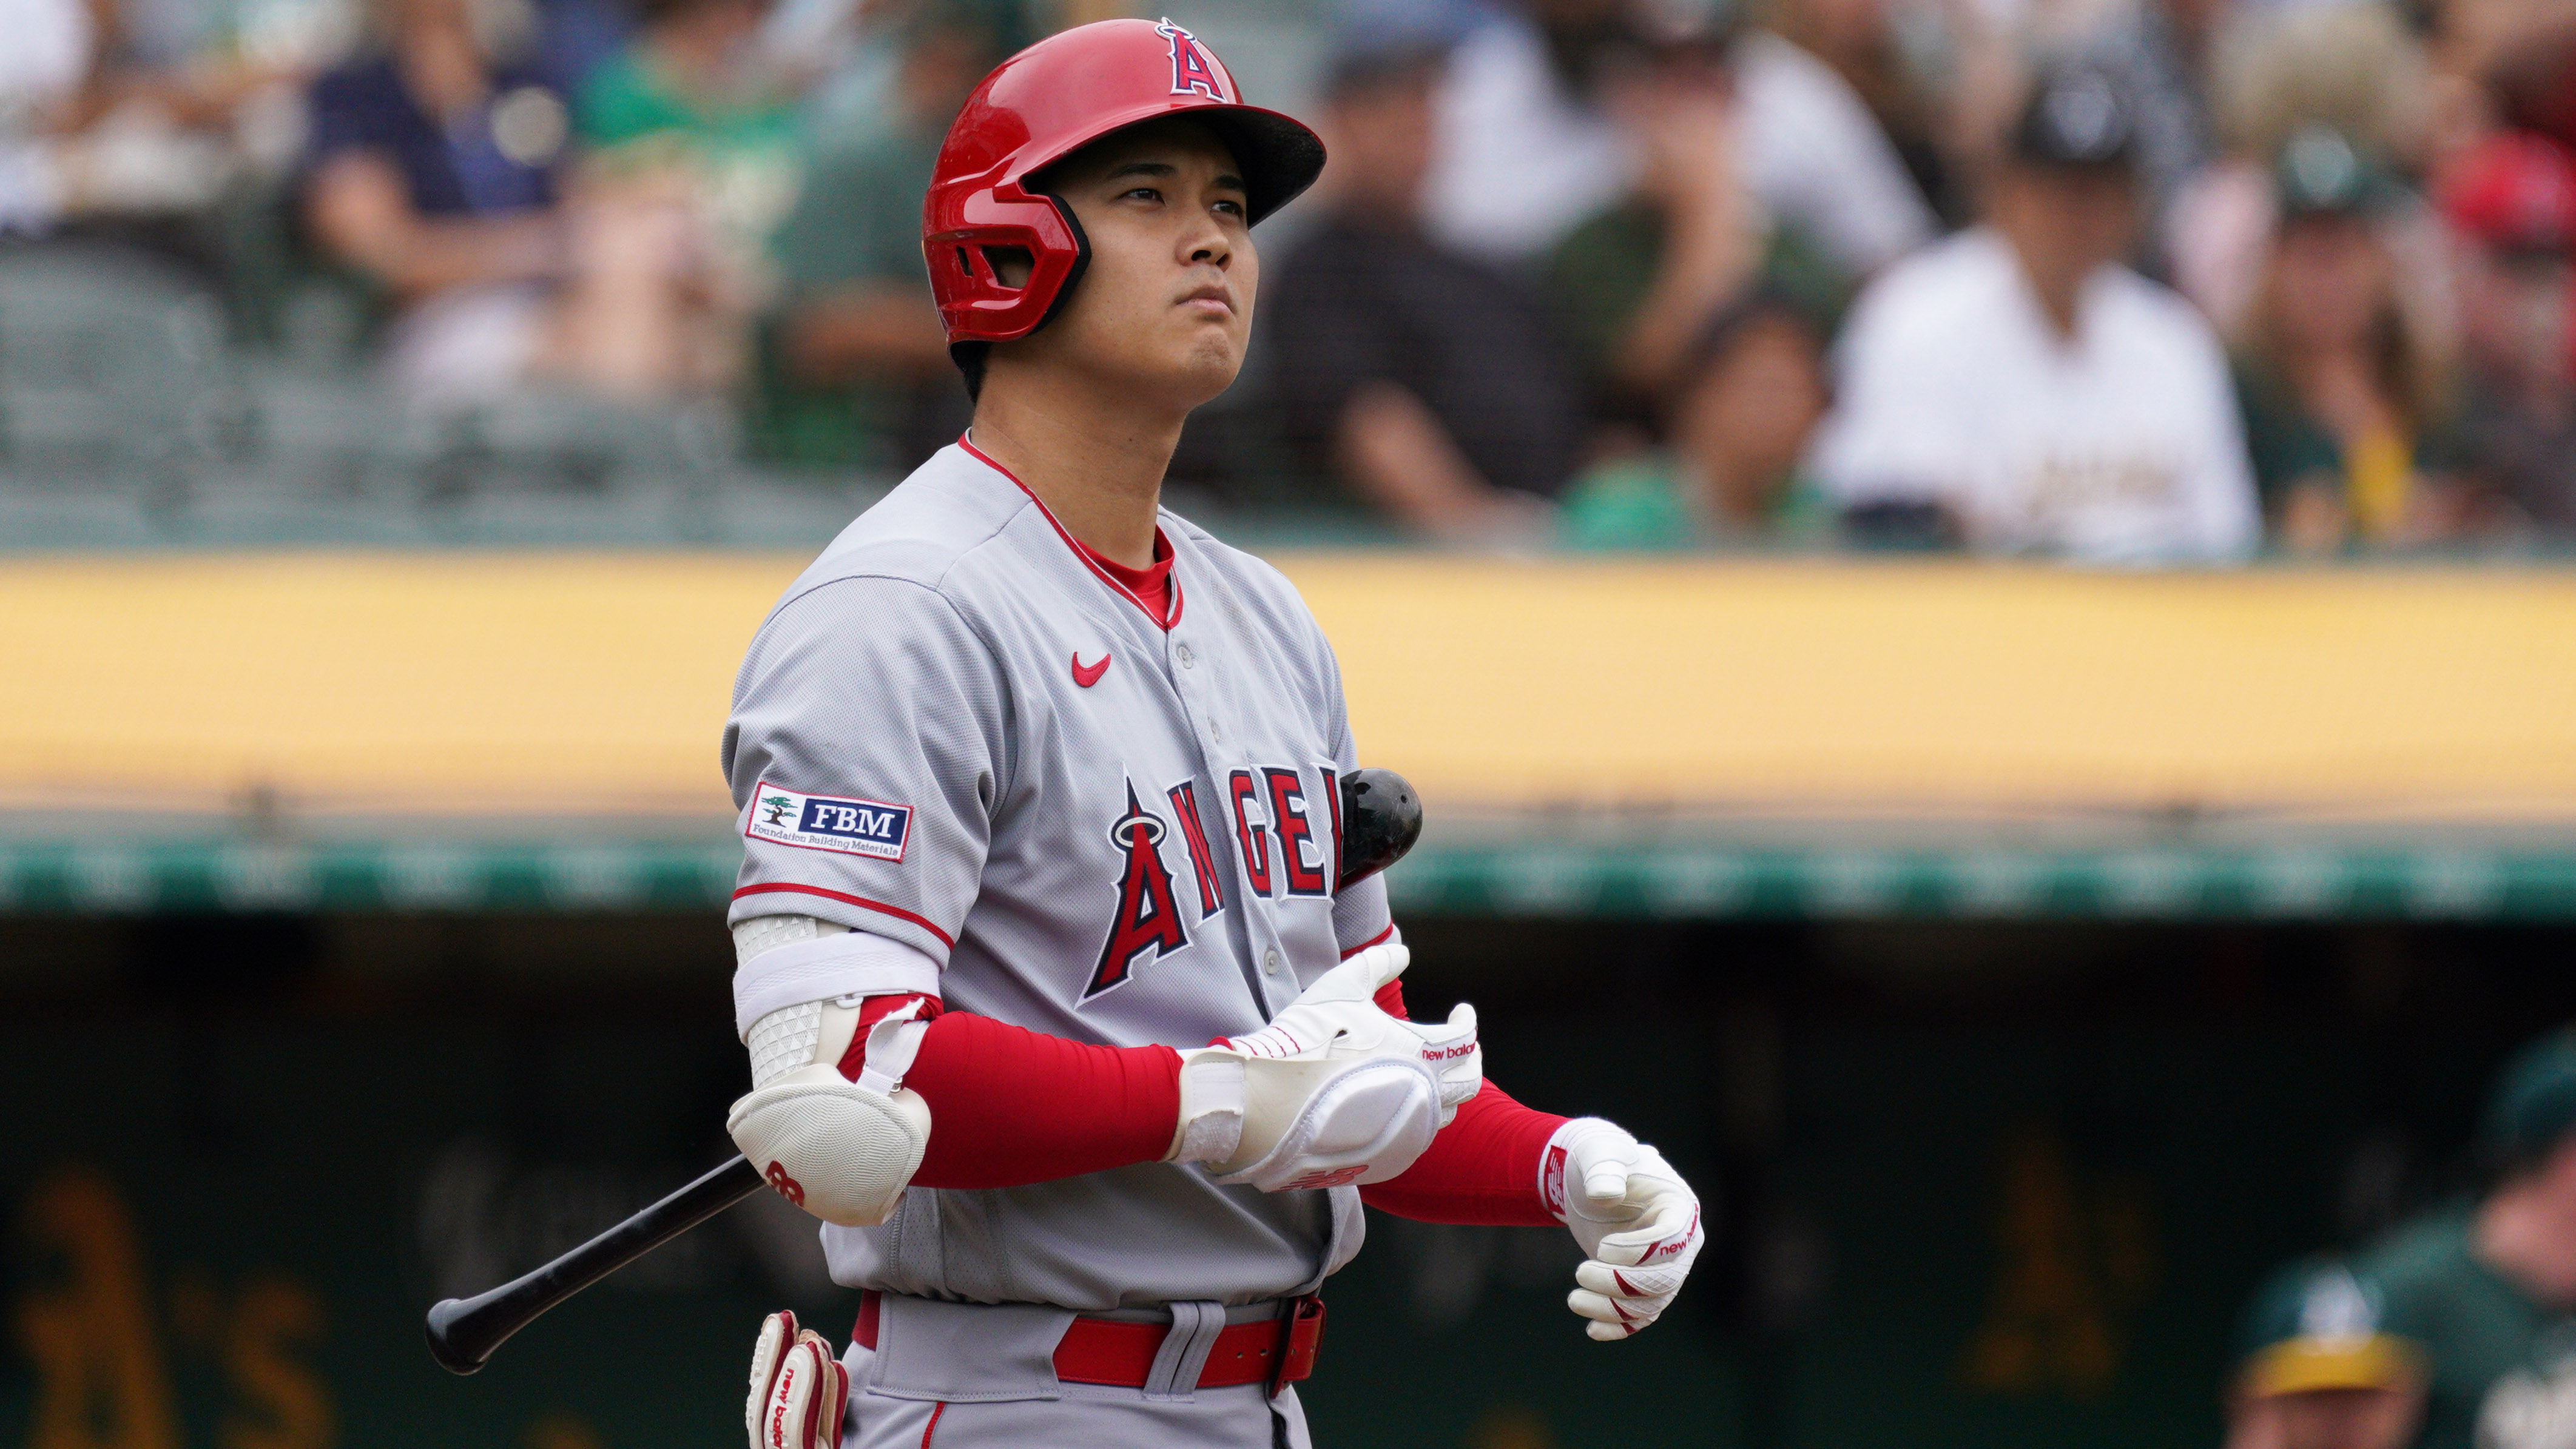 Elbow surgery 'inevitable' for Angels' Shohei Ohtani, agent says